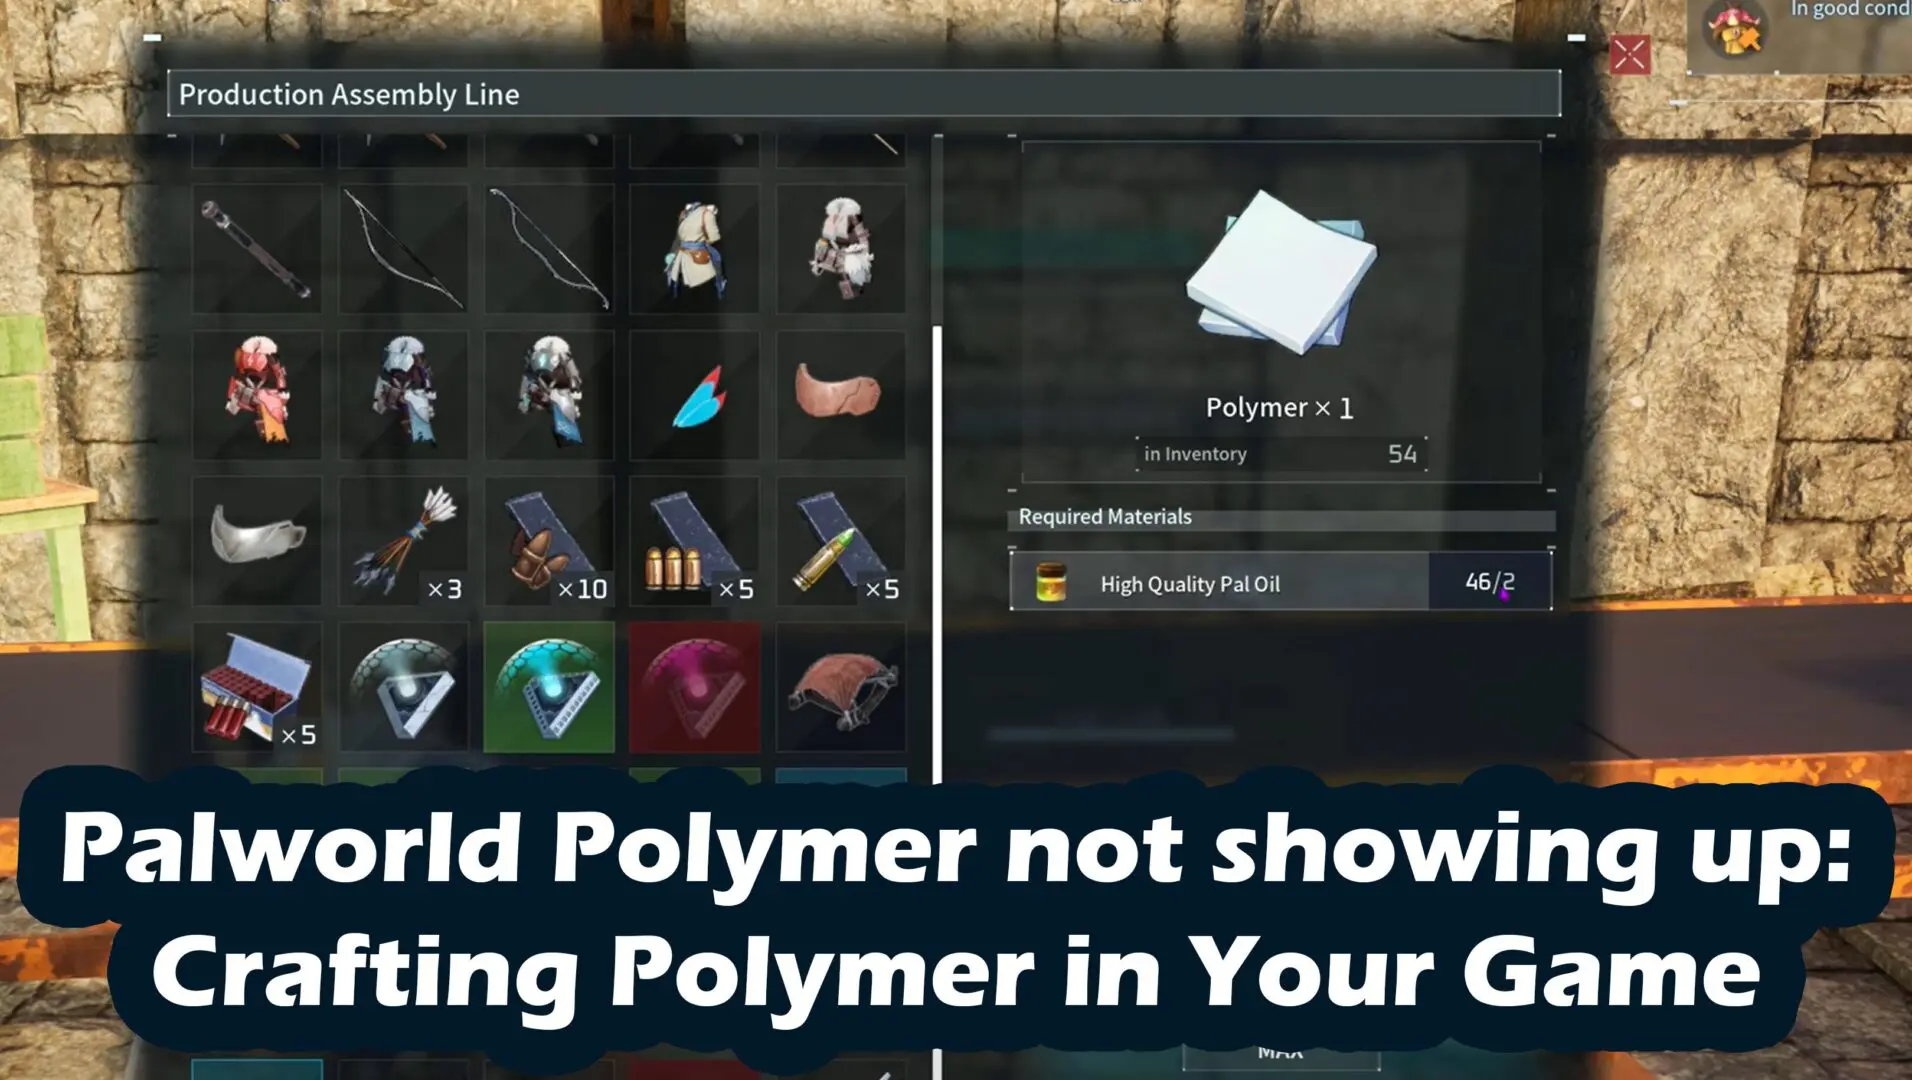 Palworld Polymer not showing up: Crafting Polymer in Your Game